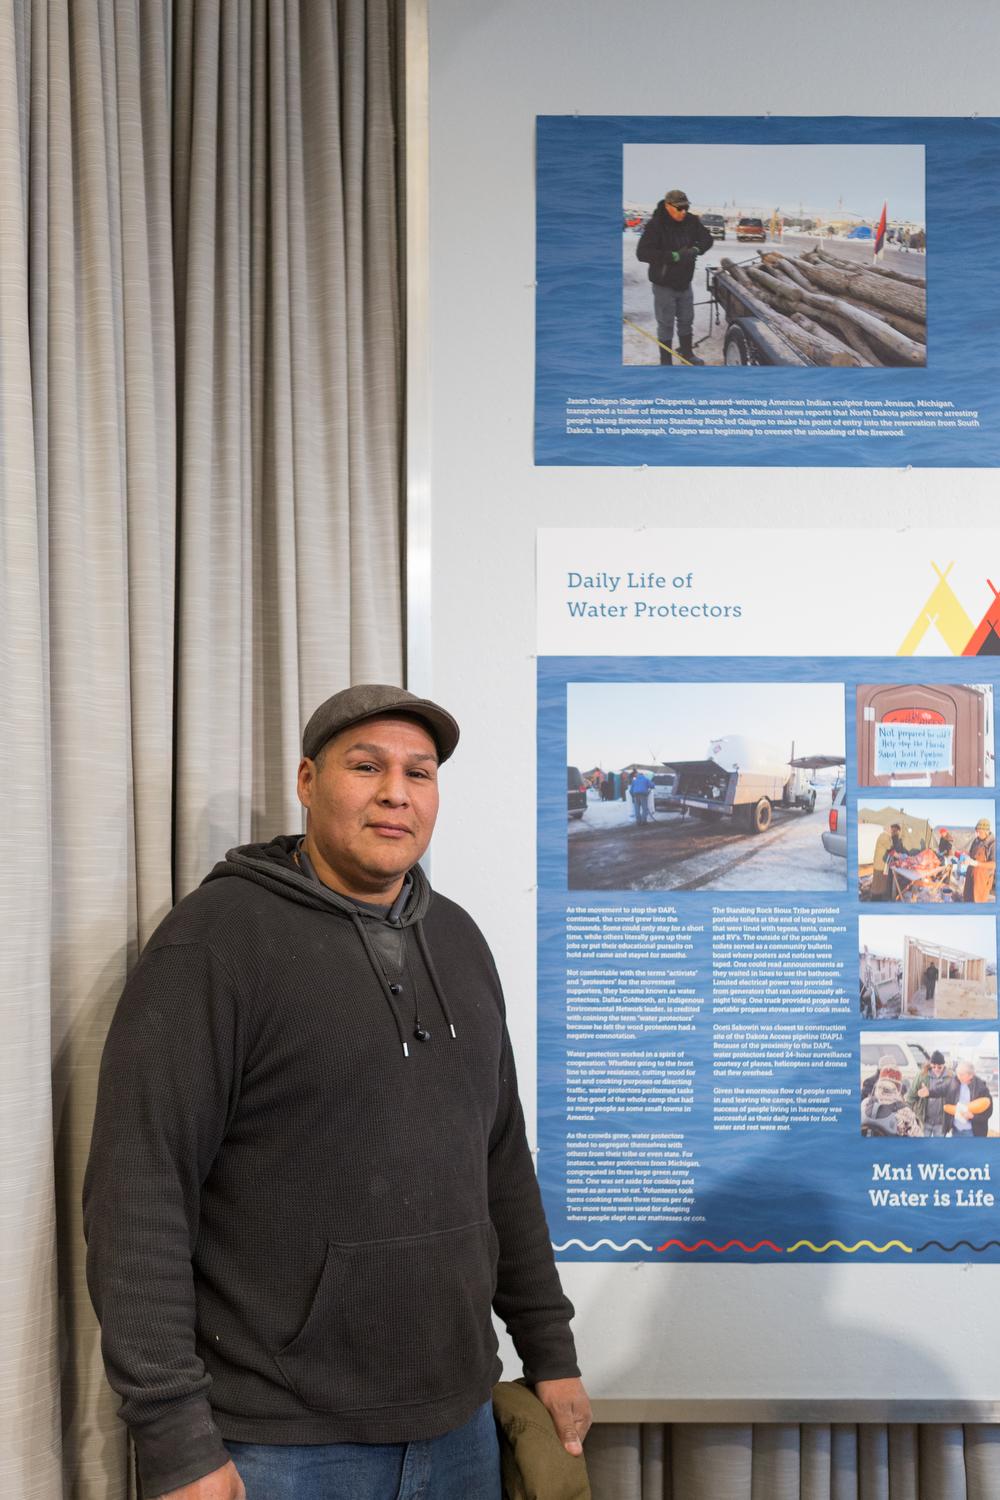 STANDING ROCK: PHOTOGRAPHS OF AN INDIGENOUS MOVEMENT RECEPTION